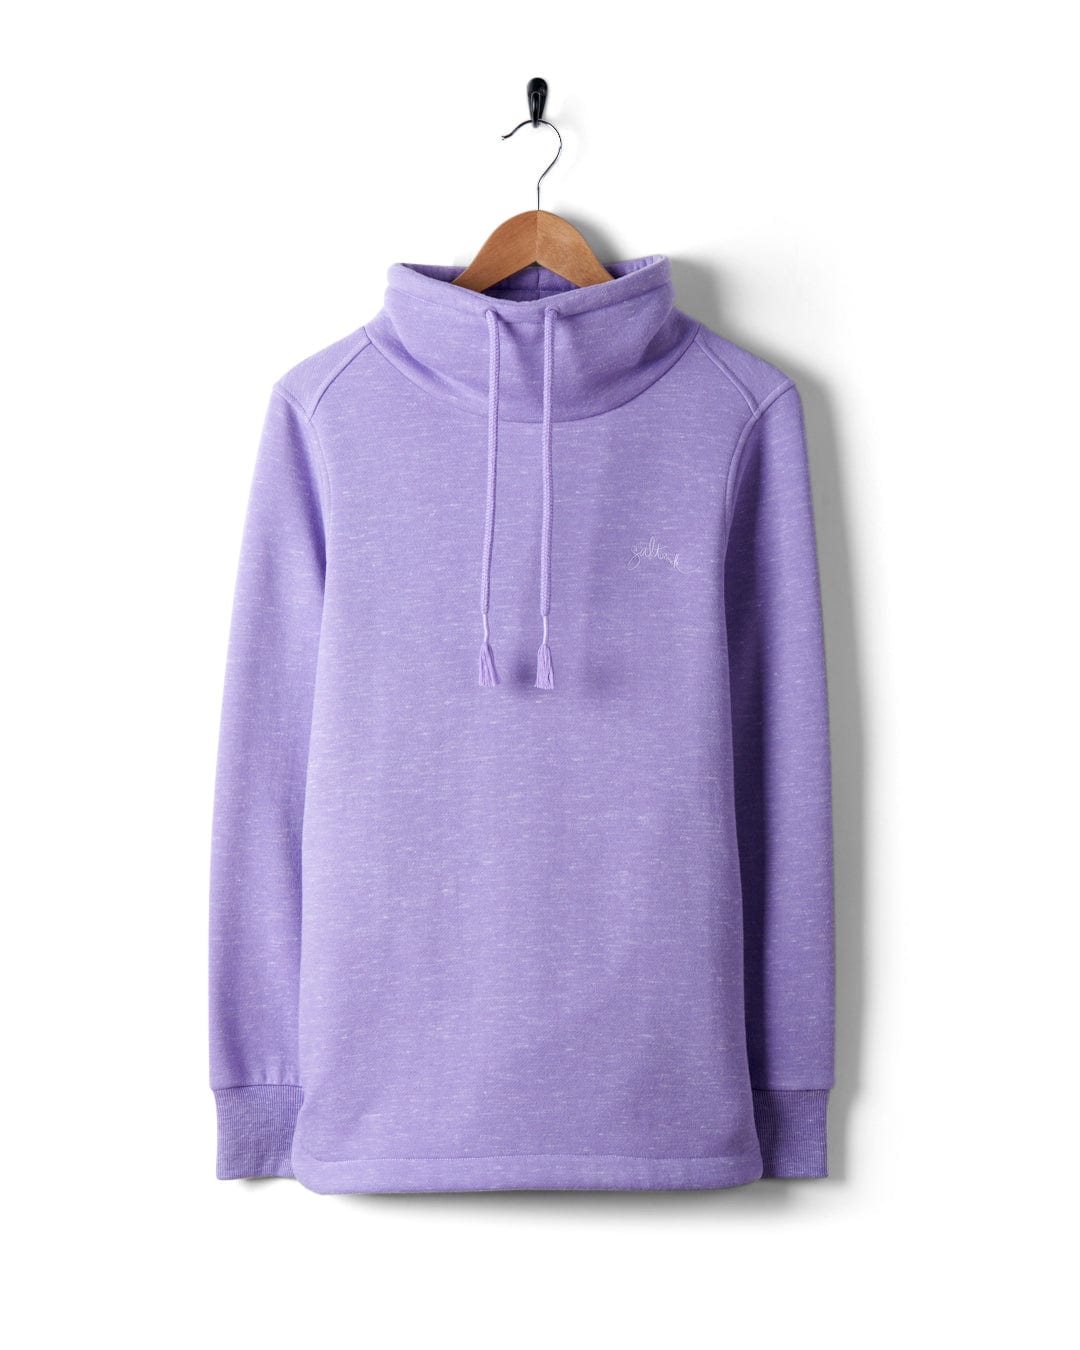 A Harper - Womens Longline Pop Sweat - Lilac sweatshirt from Saltrock, with embroidered branding, hanging on a hanger.